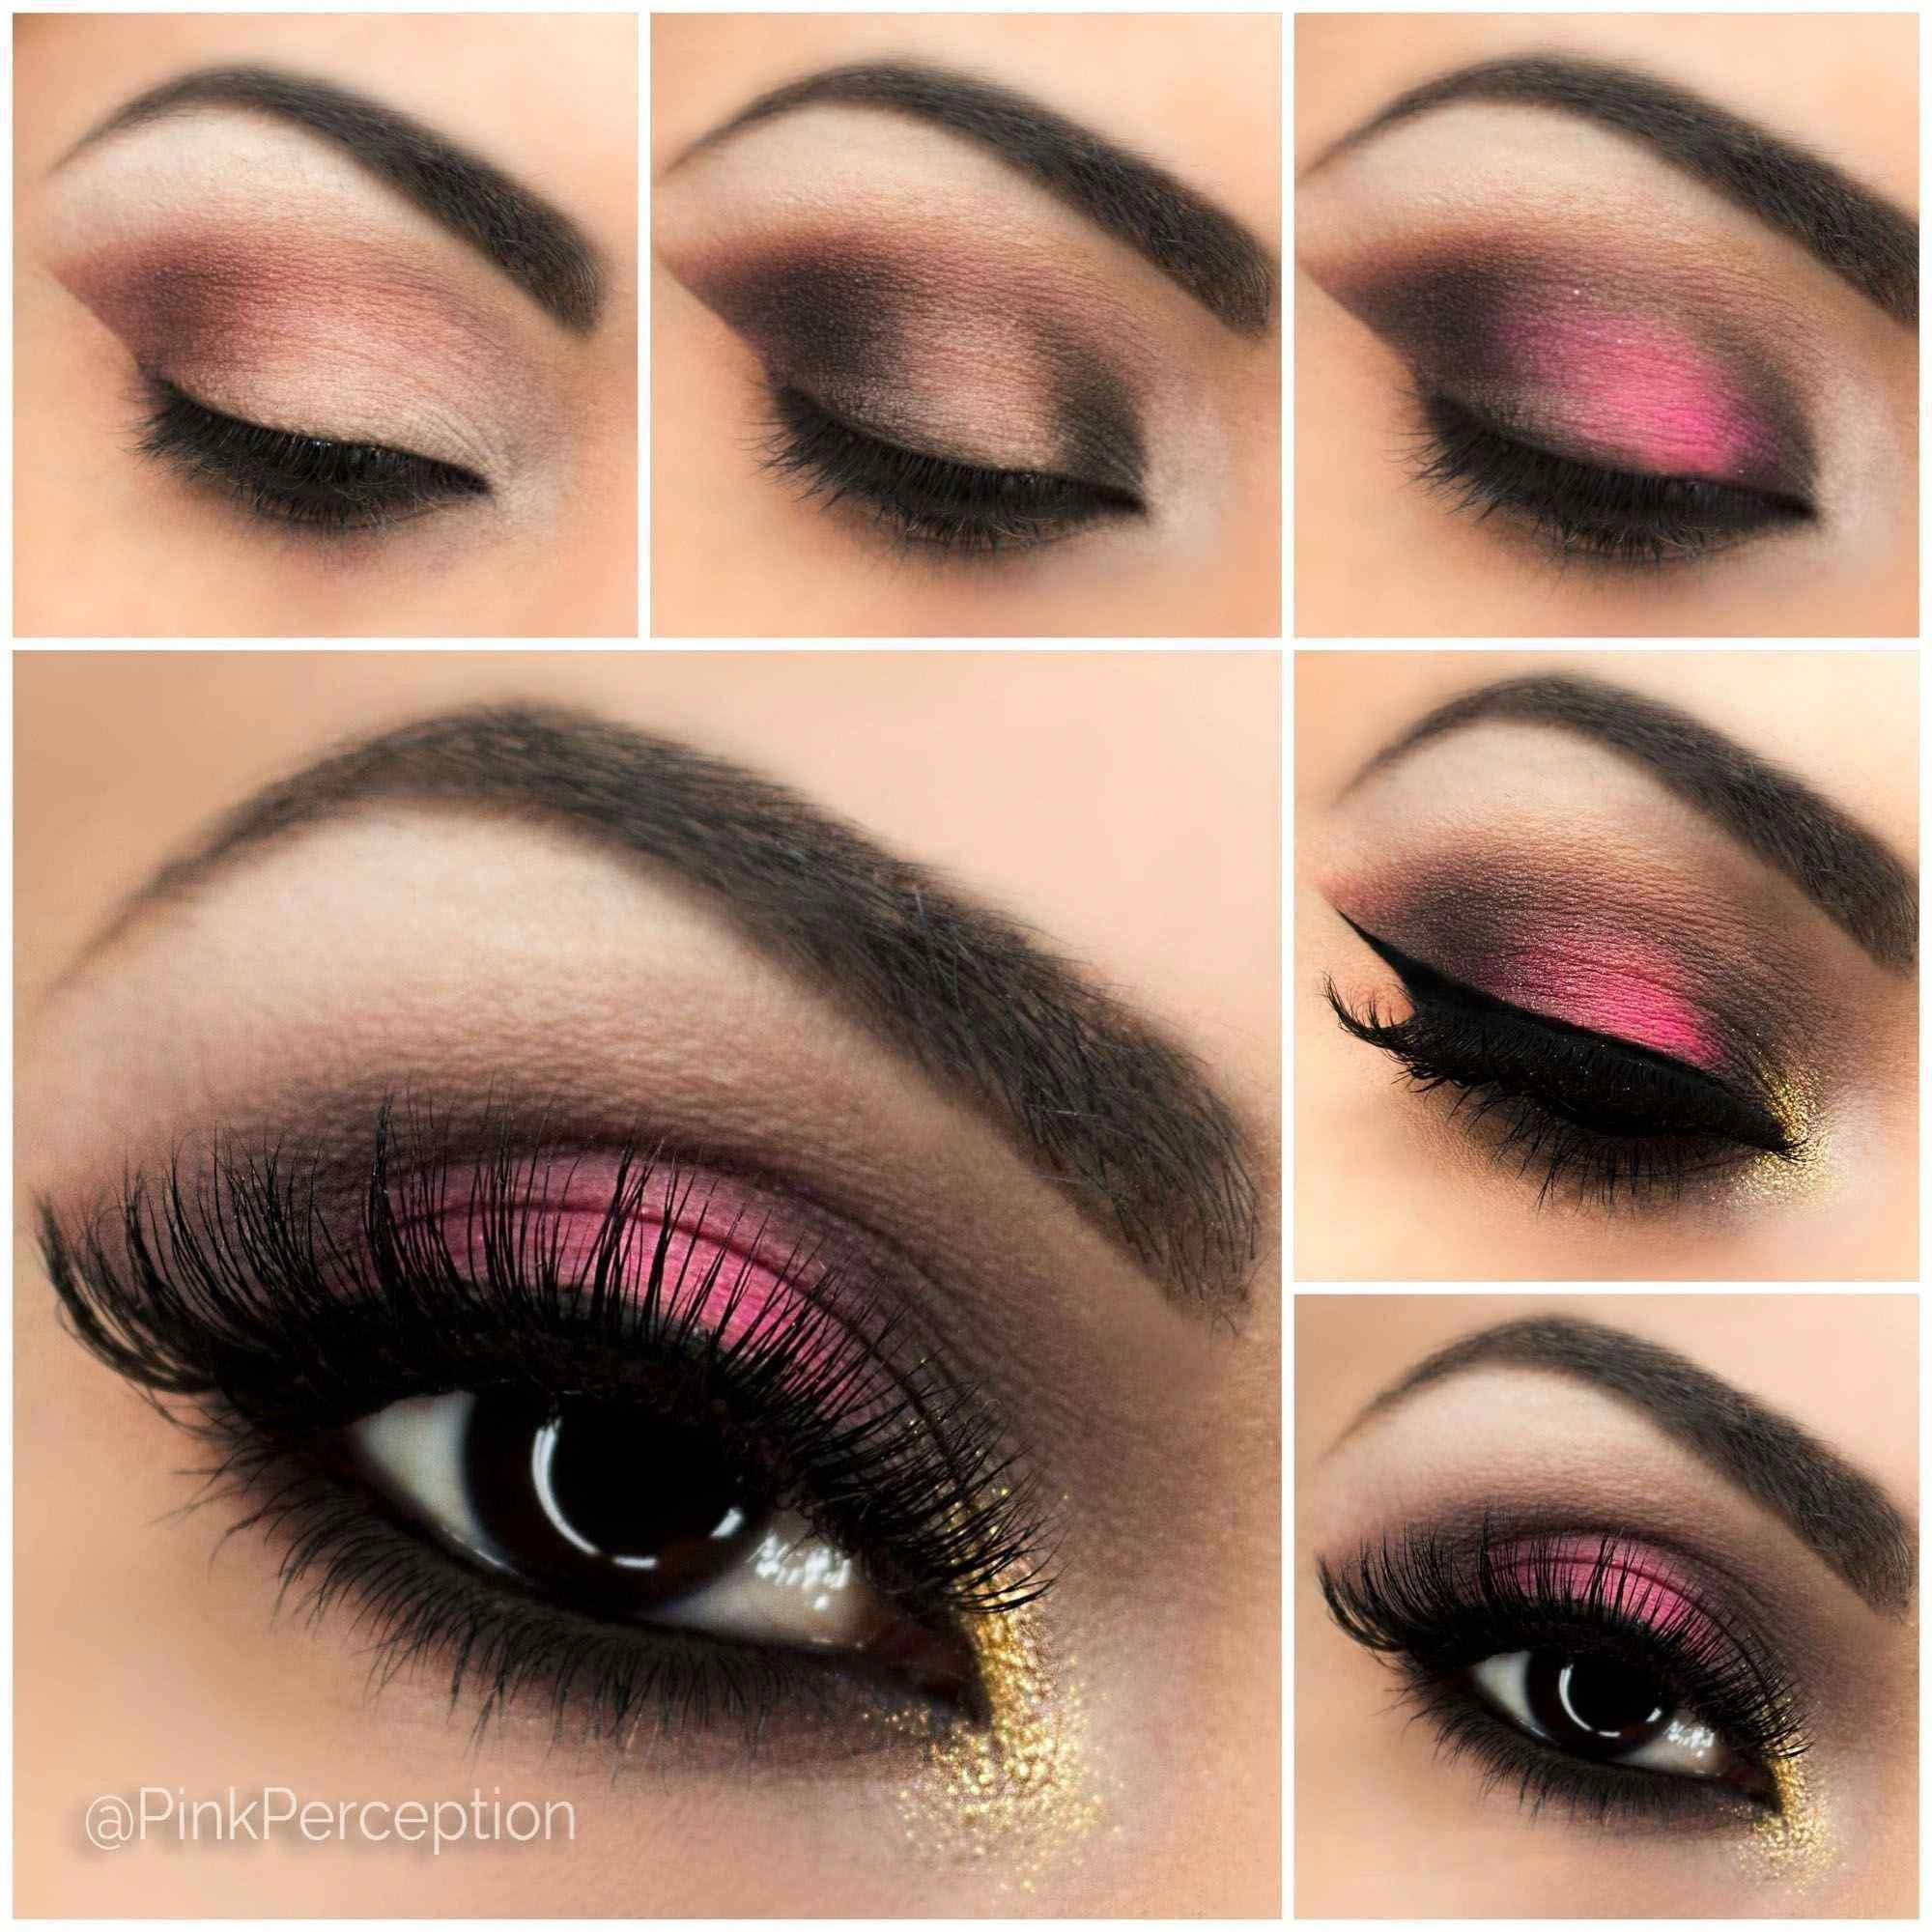 Eye Makeup Steps Essential Things For 23 Essential Steps To Best Of Makeup Ideas